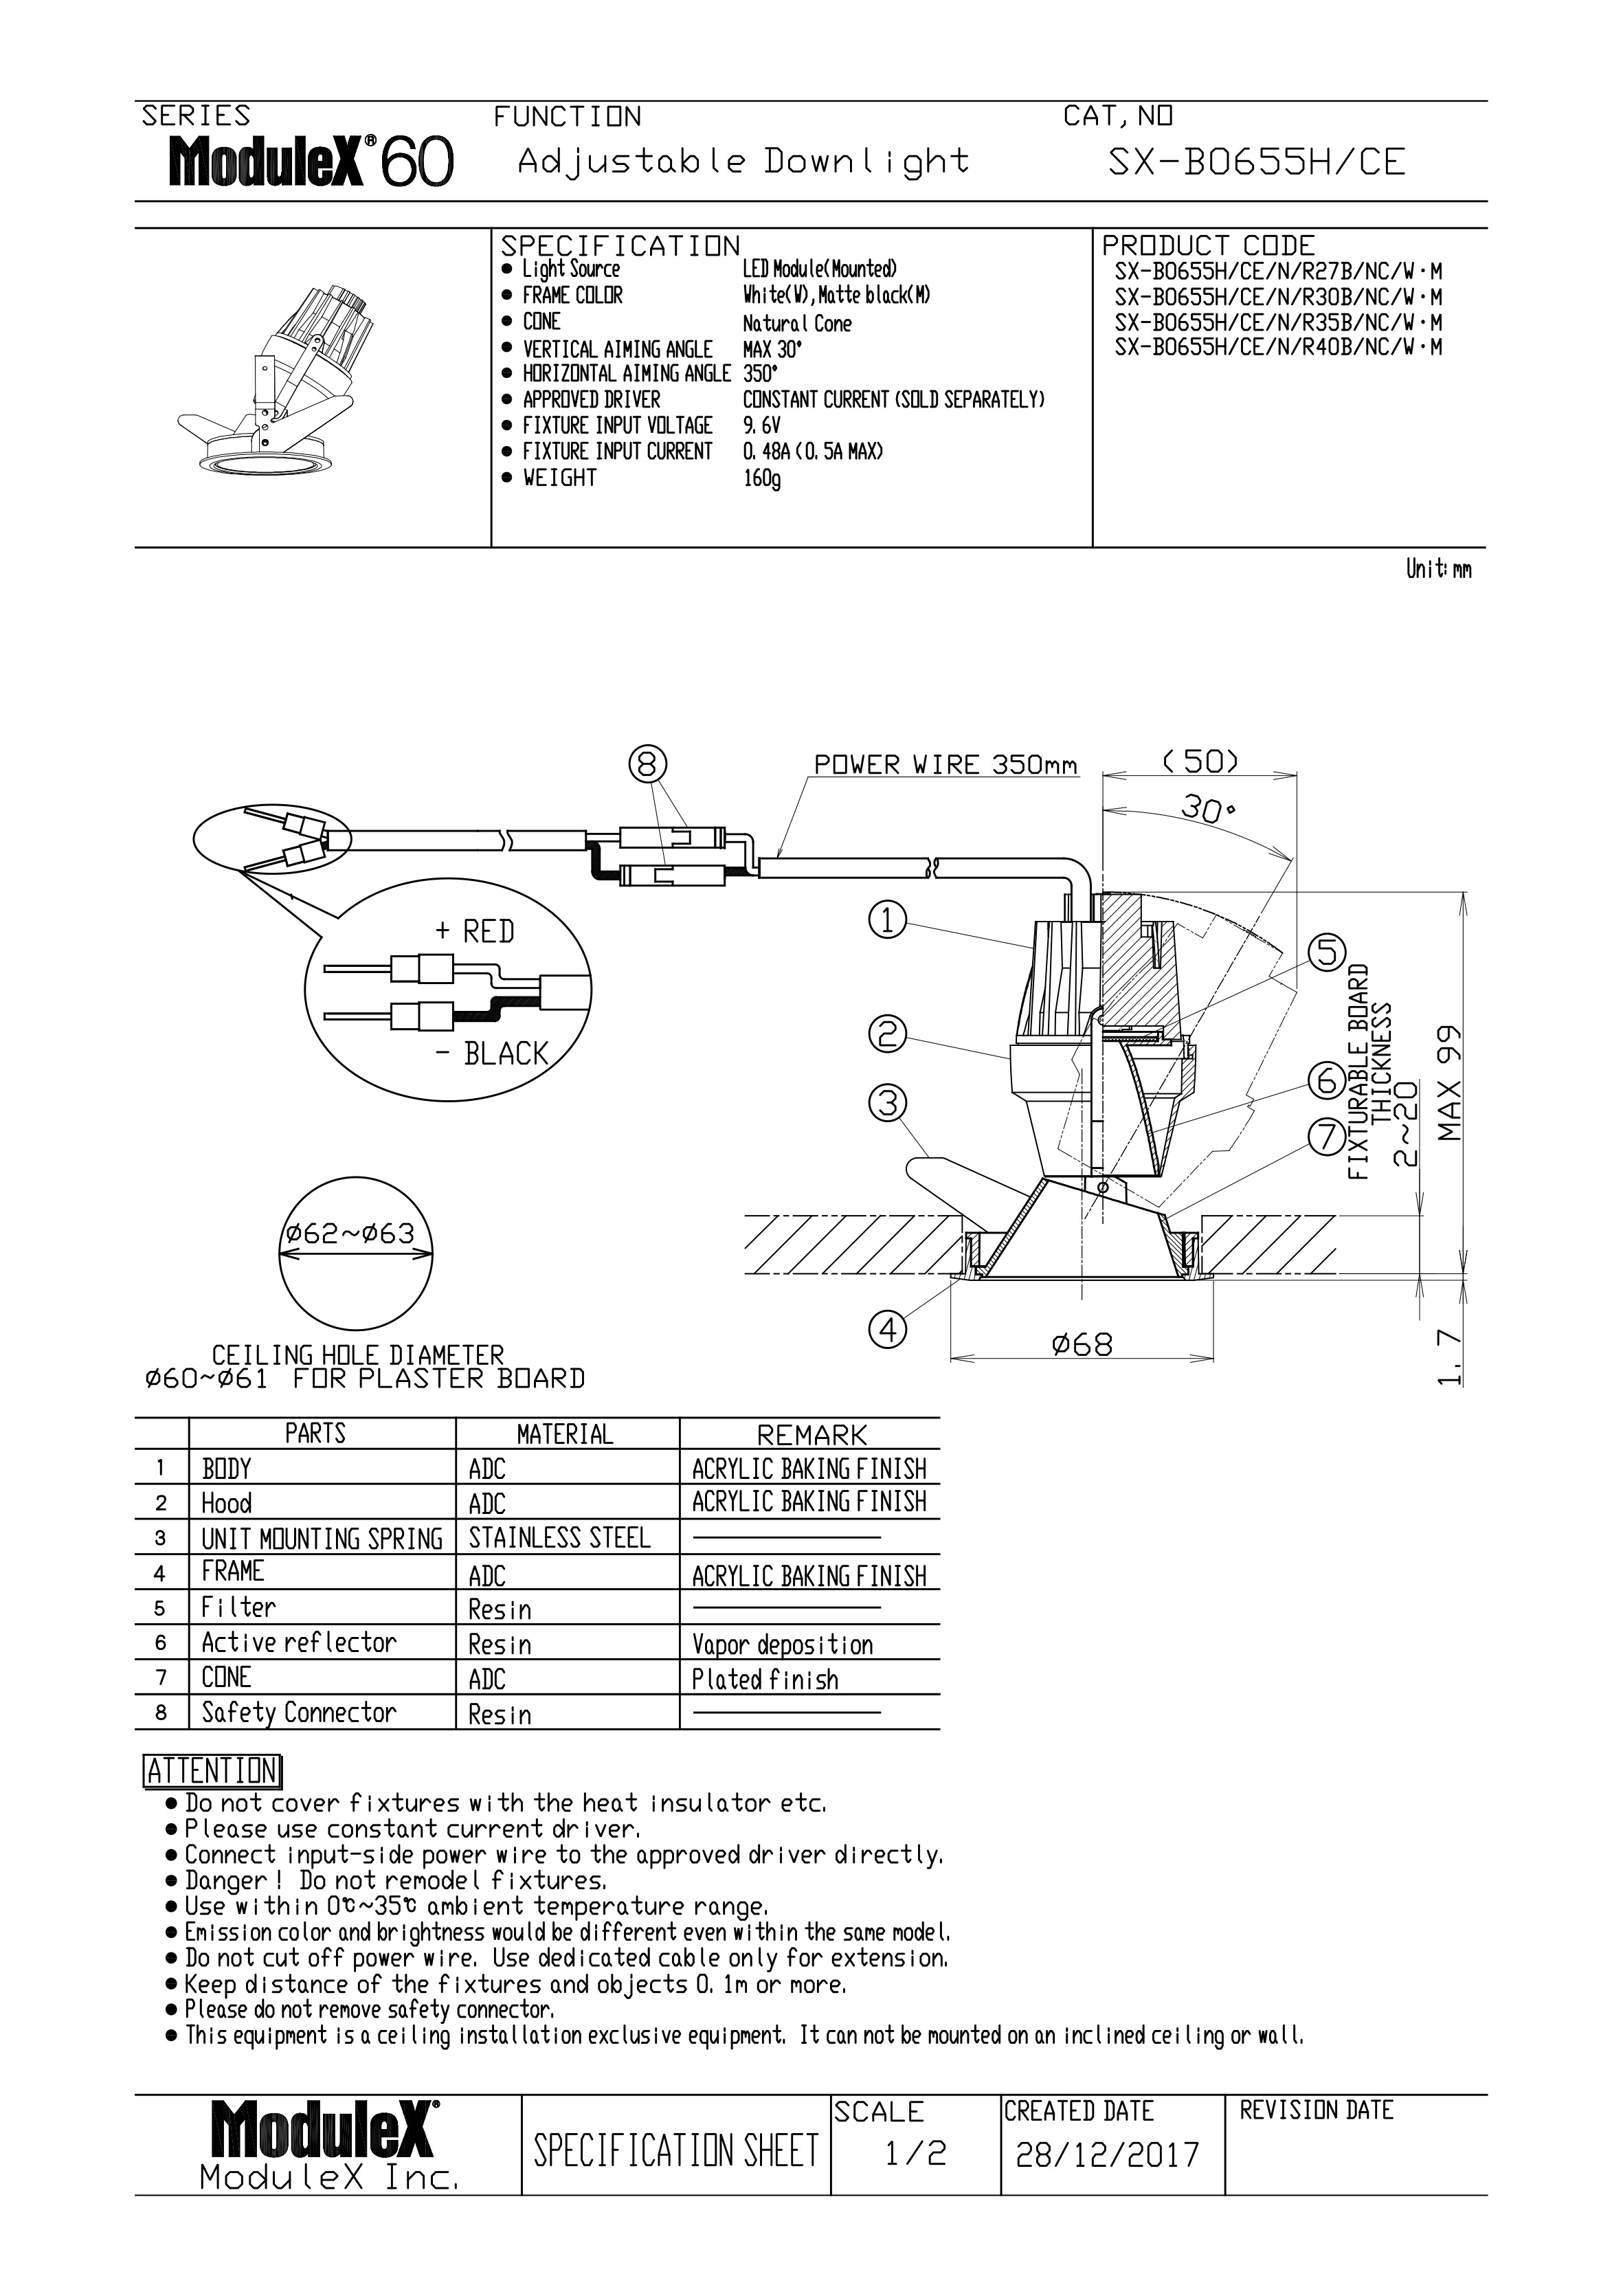 SX-B0655H Specification Sheet